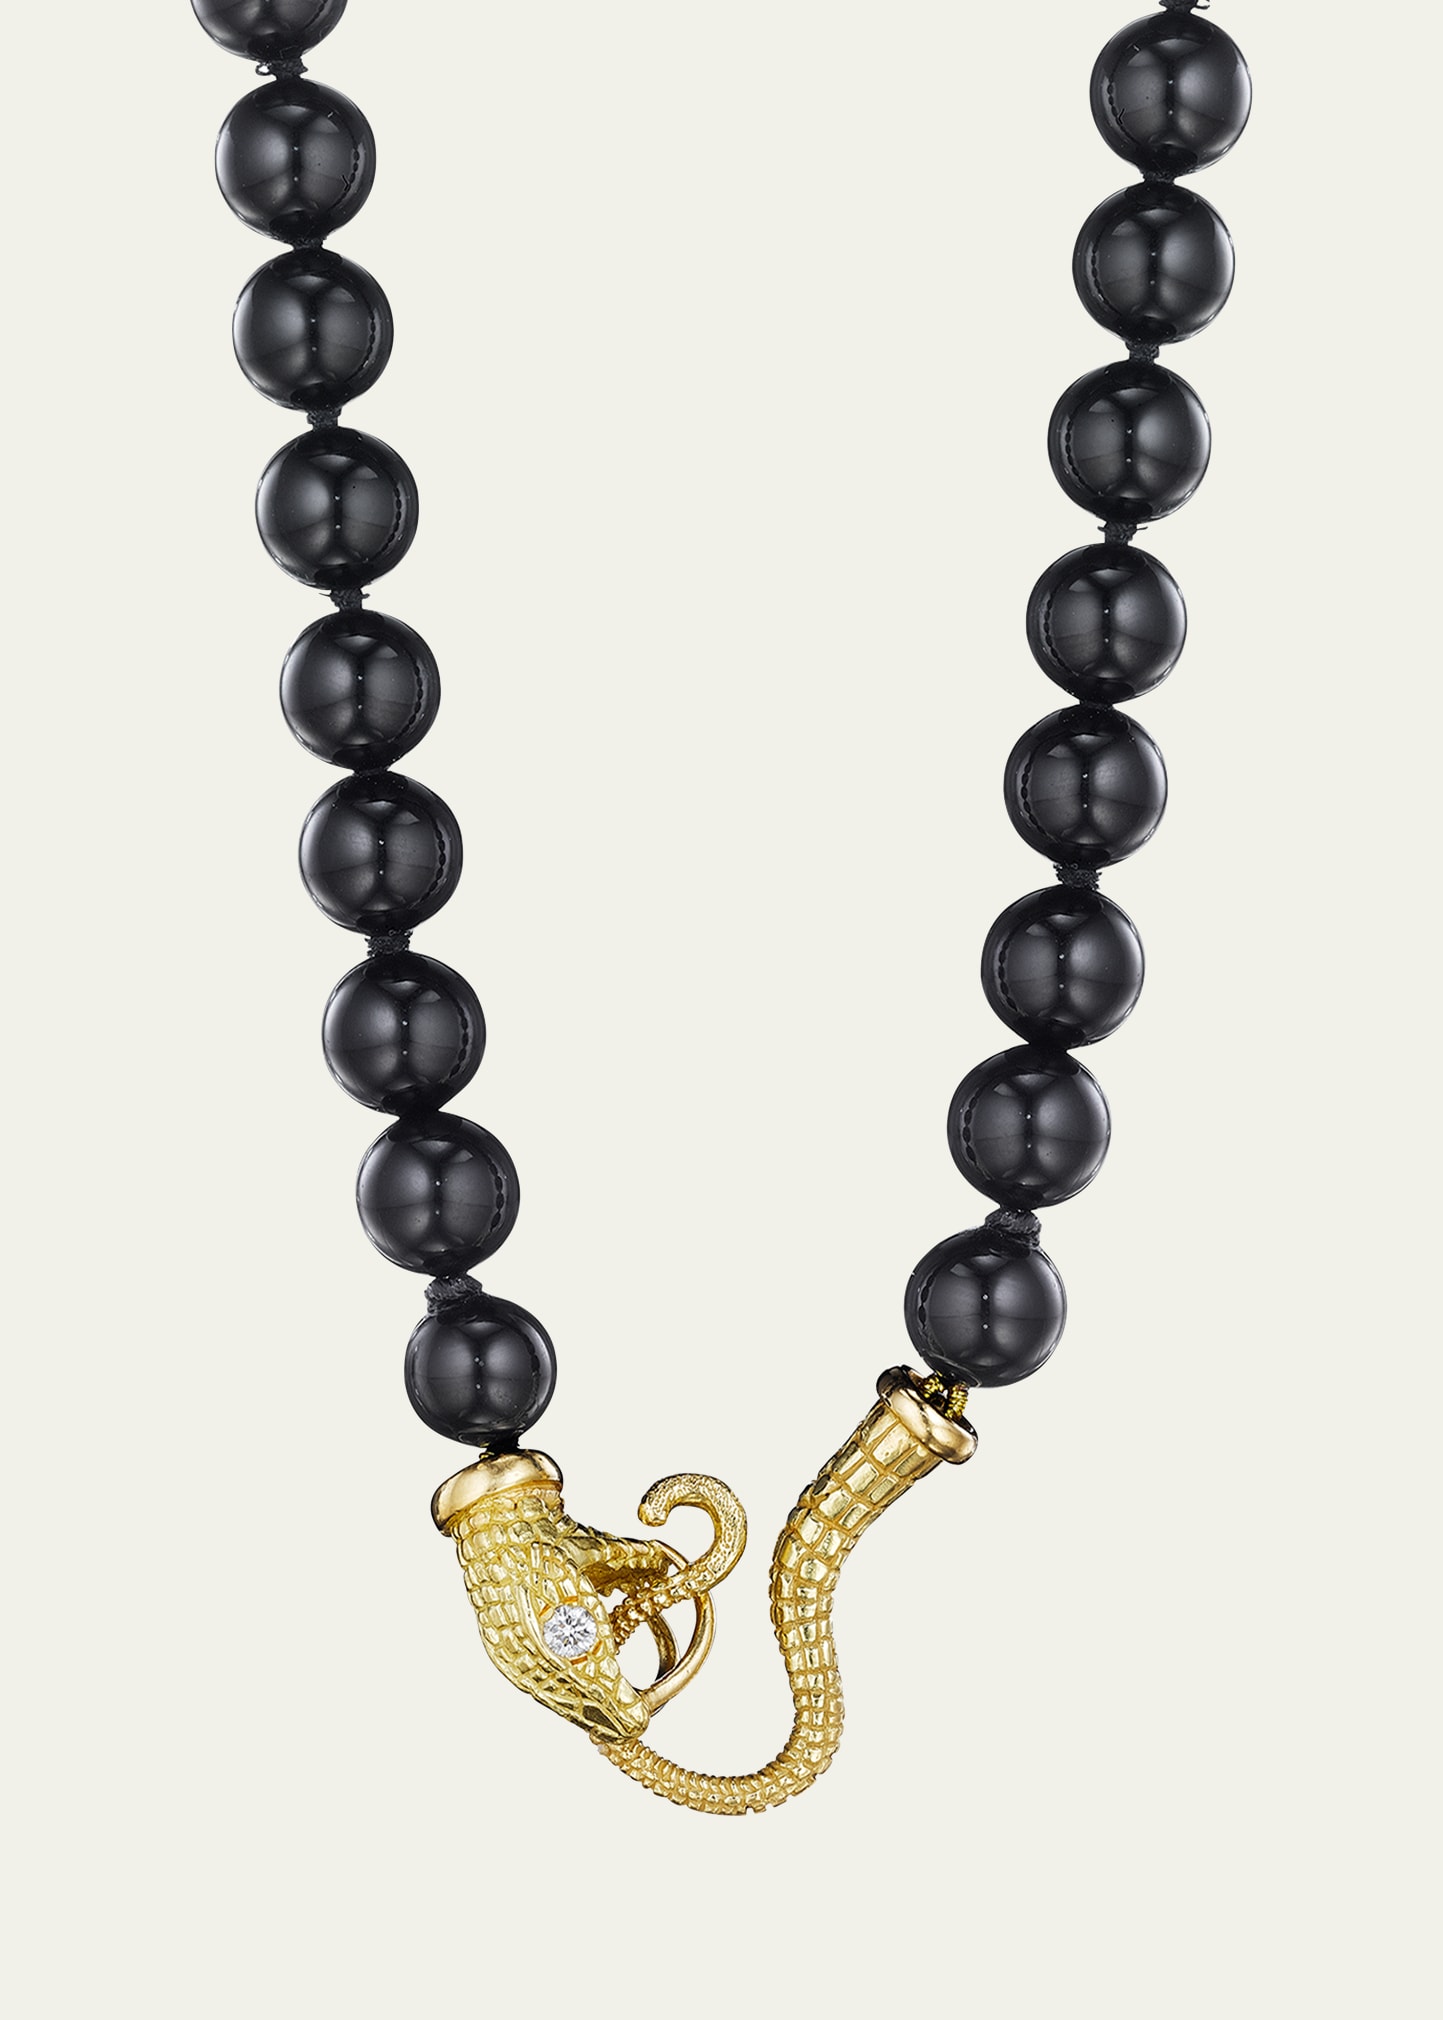 Anthony Lent Black Onyx Bead Serpent Necklace in 18K Gold and Diamonds